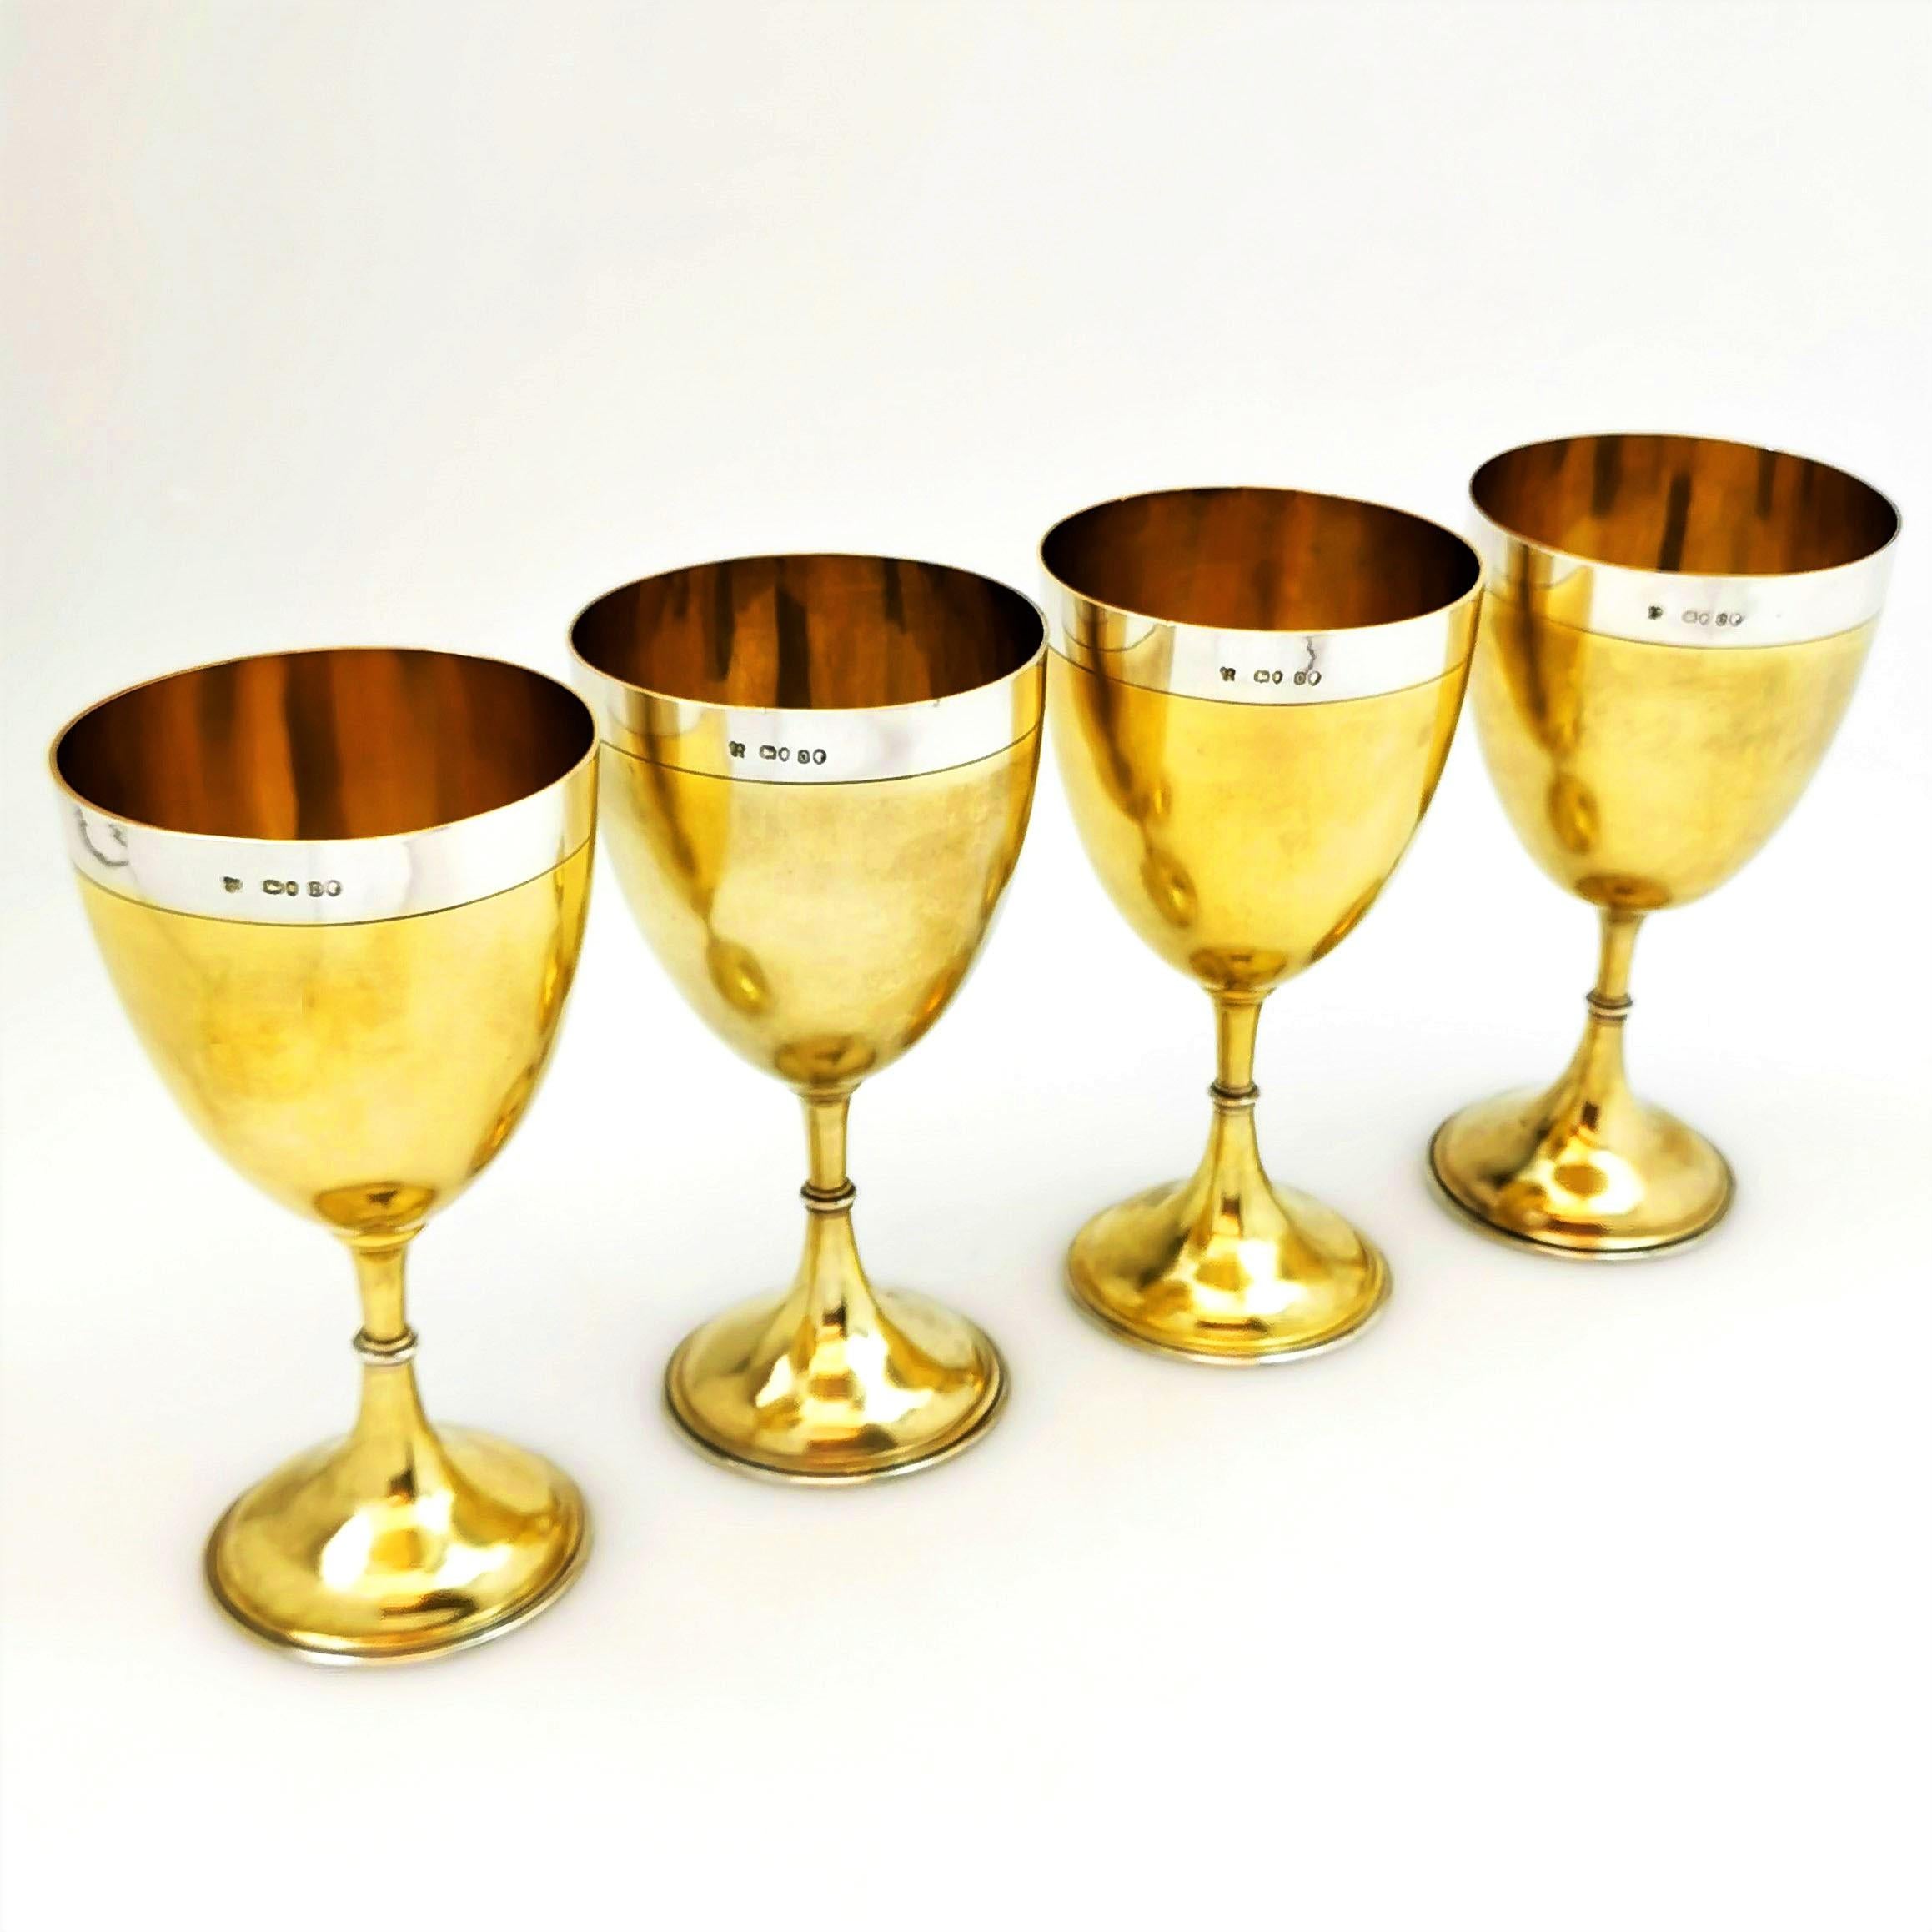 A set of beautiful Victorian Solid Silver Wine Goblets. These antique Goblets have an elegant parcel gilt design, with a subtle lemon gilt exterior and interior, topped with a polished plain silver band at the top. The Goblets are of a substantial